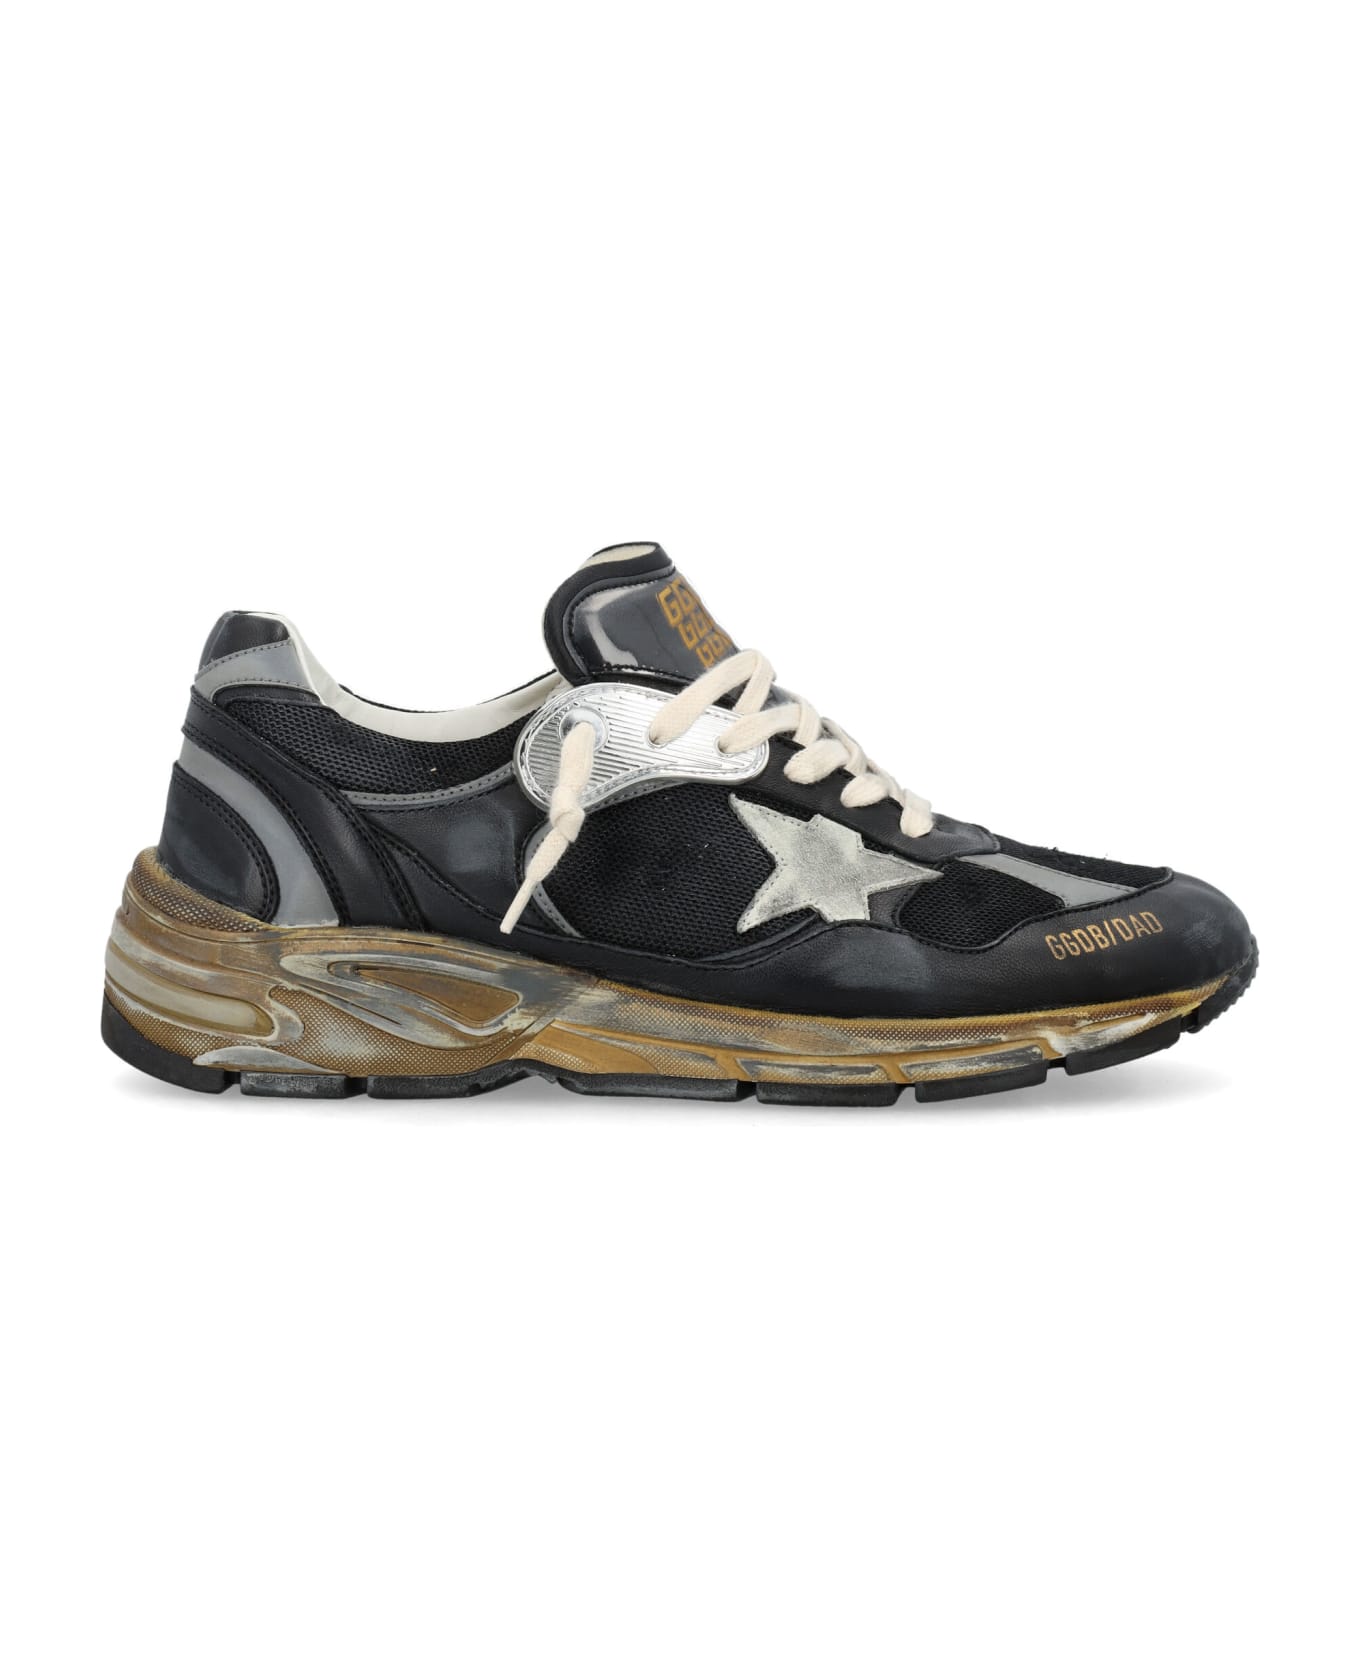 Golden Goose Dad-star Sneakers - Black/Silver/Ice スニーカー